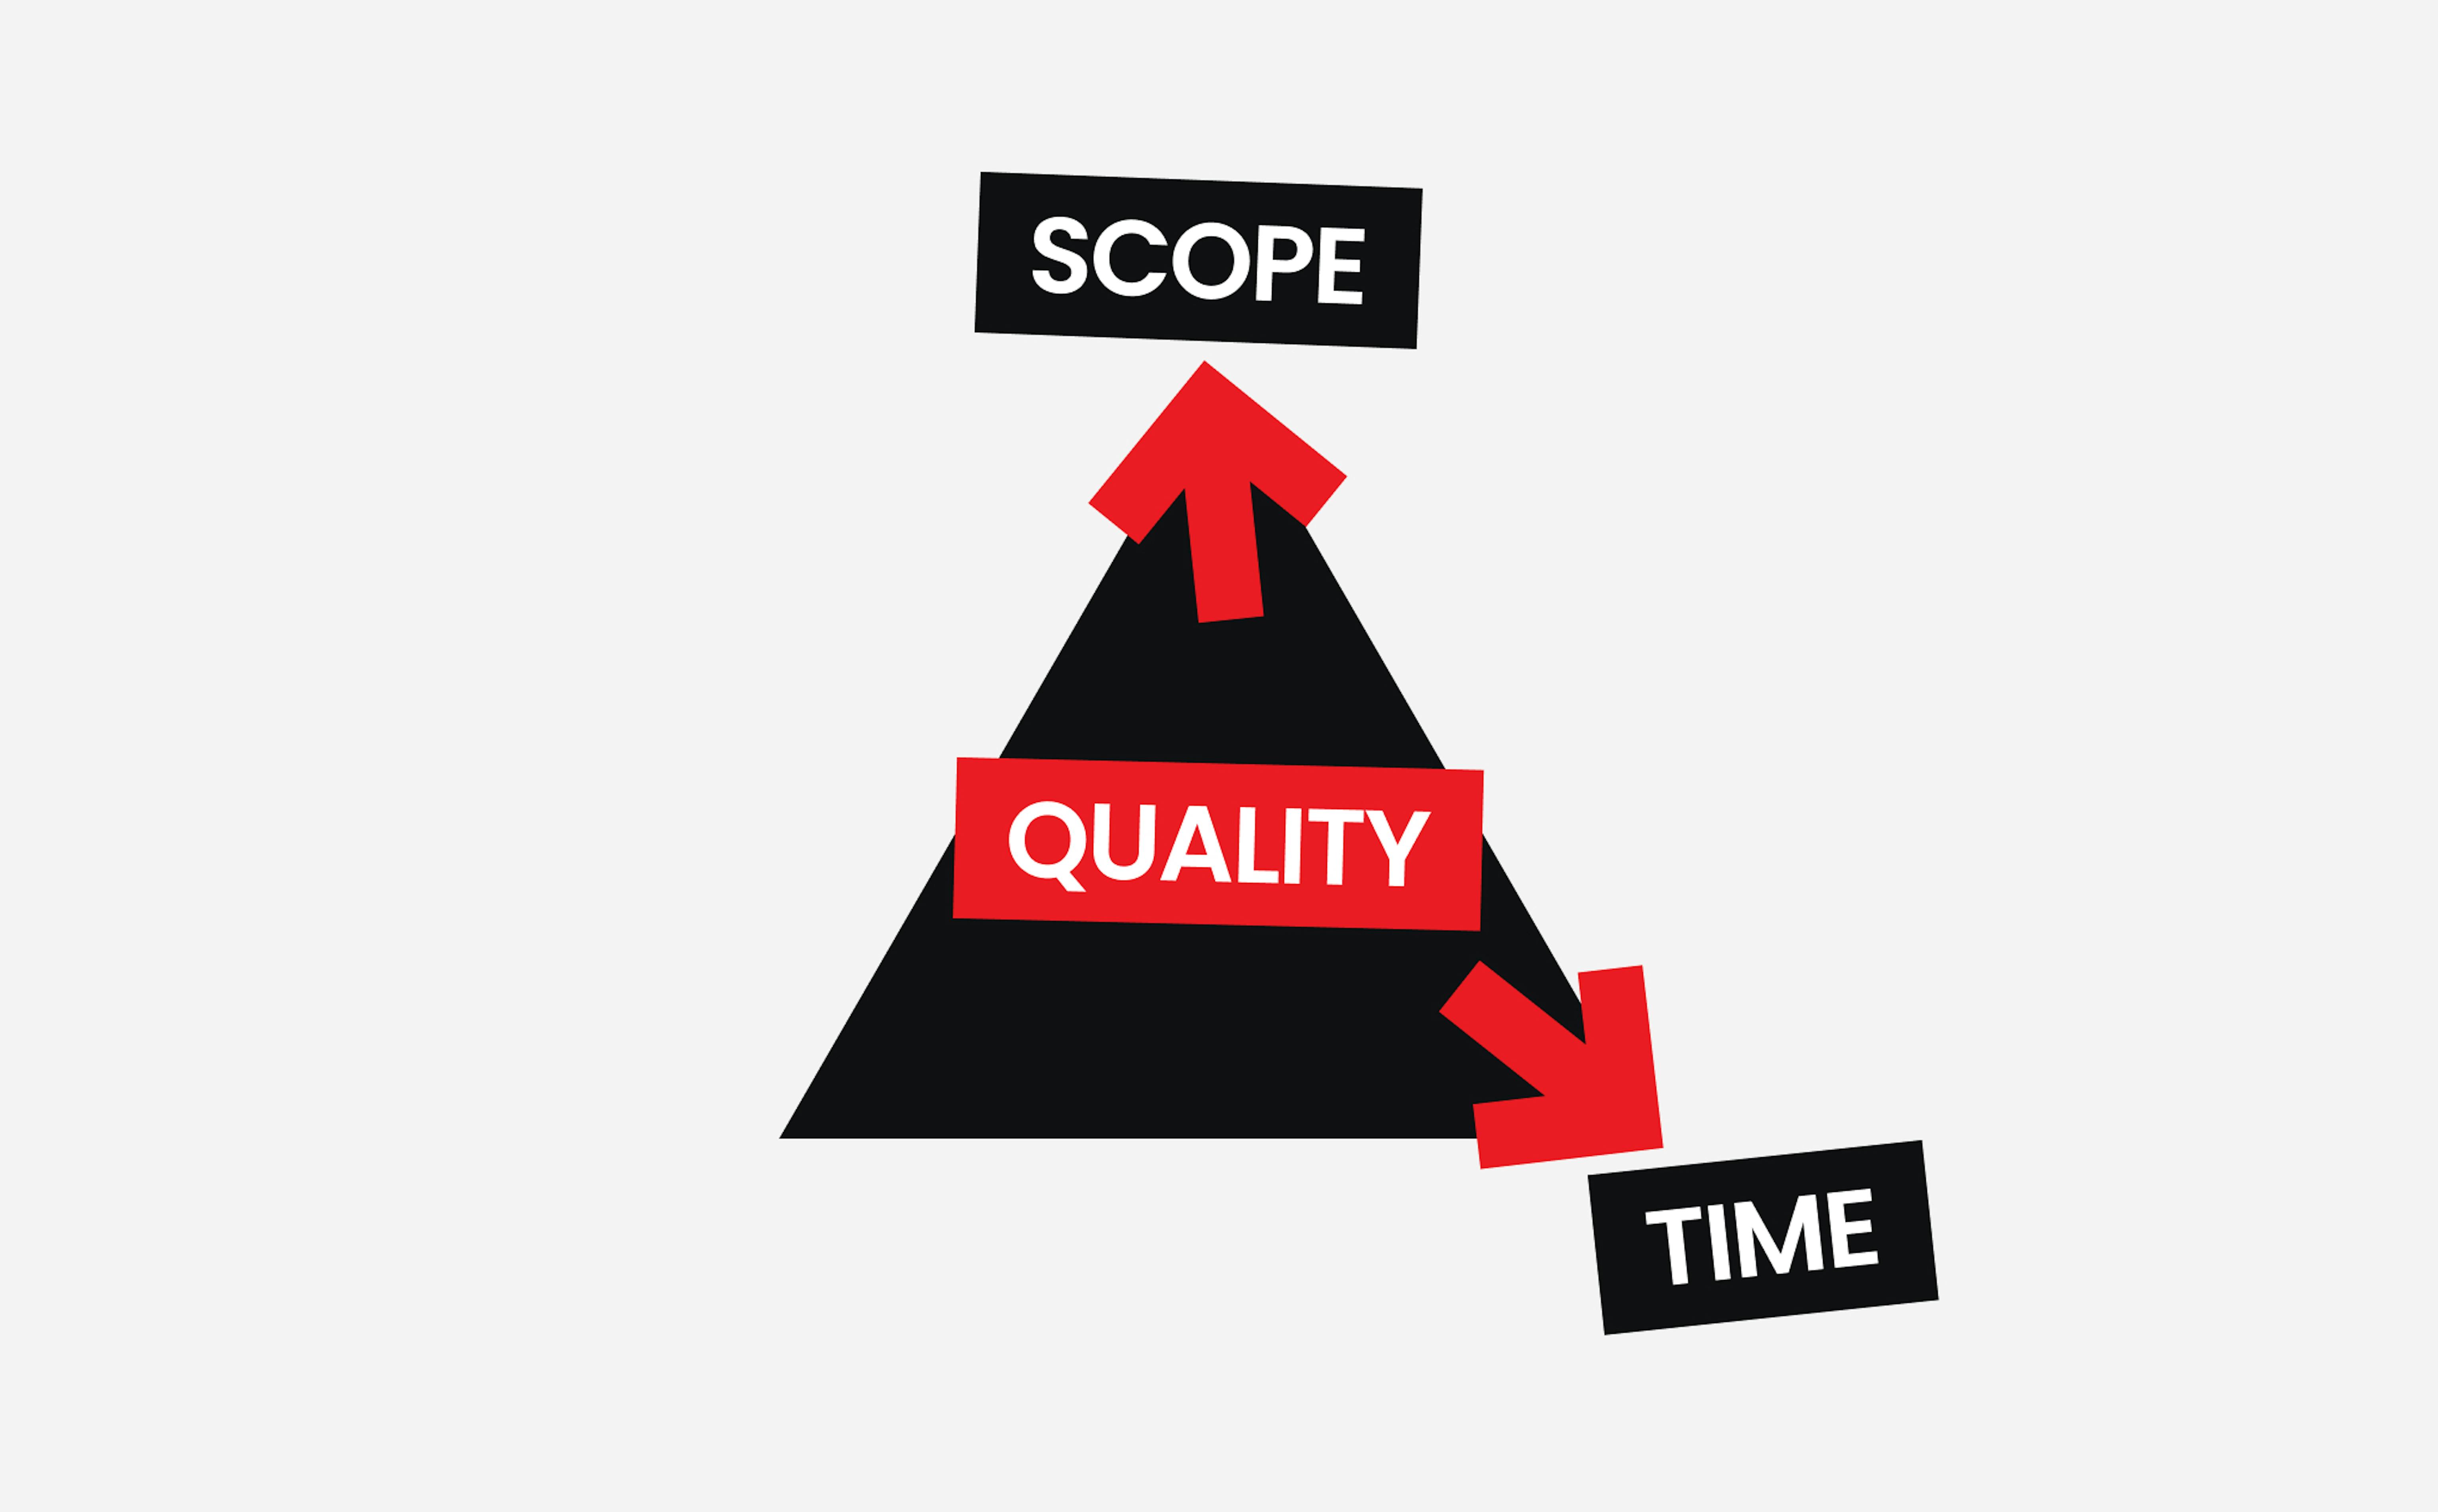 The quality of software development: scope and time